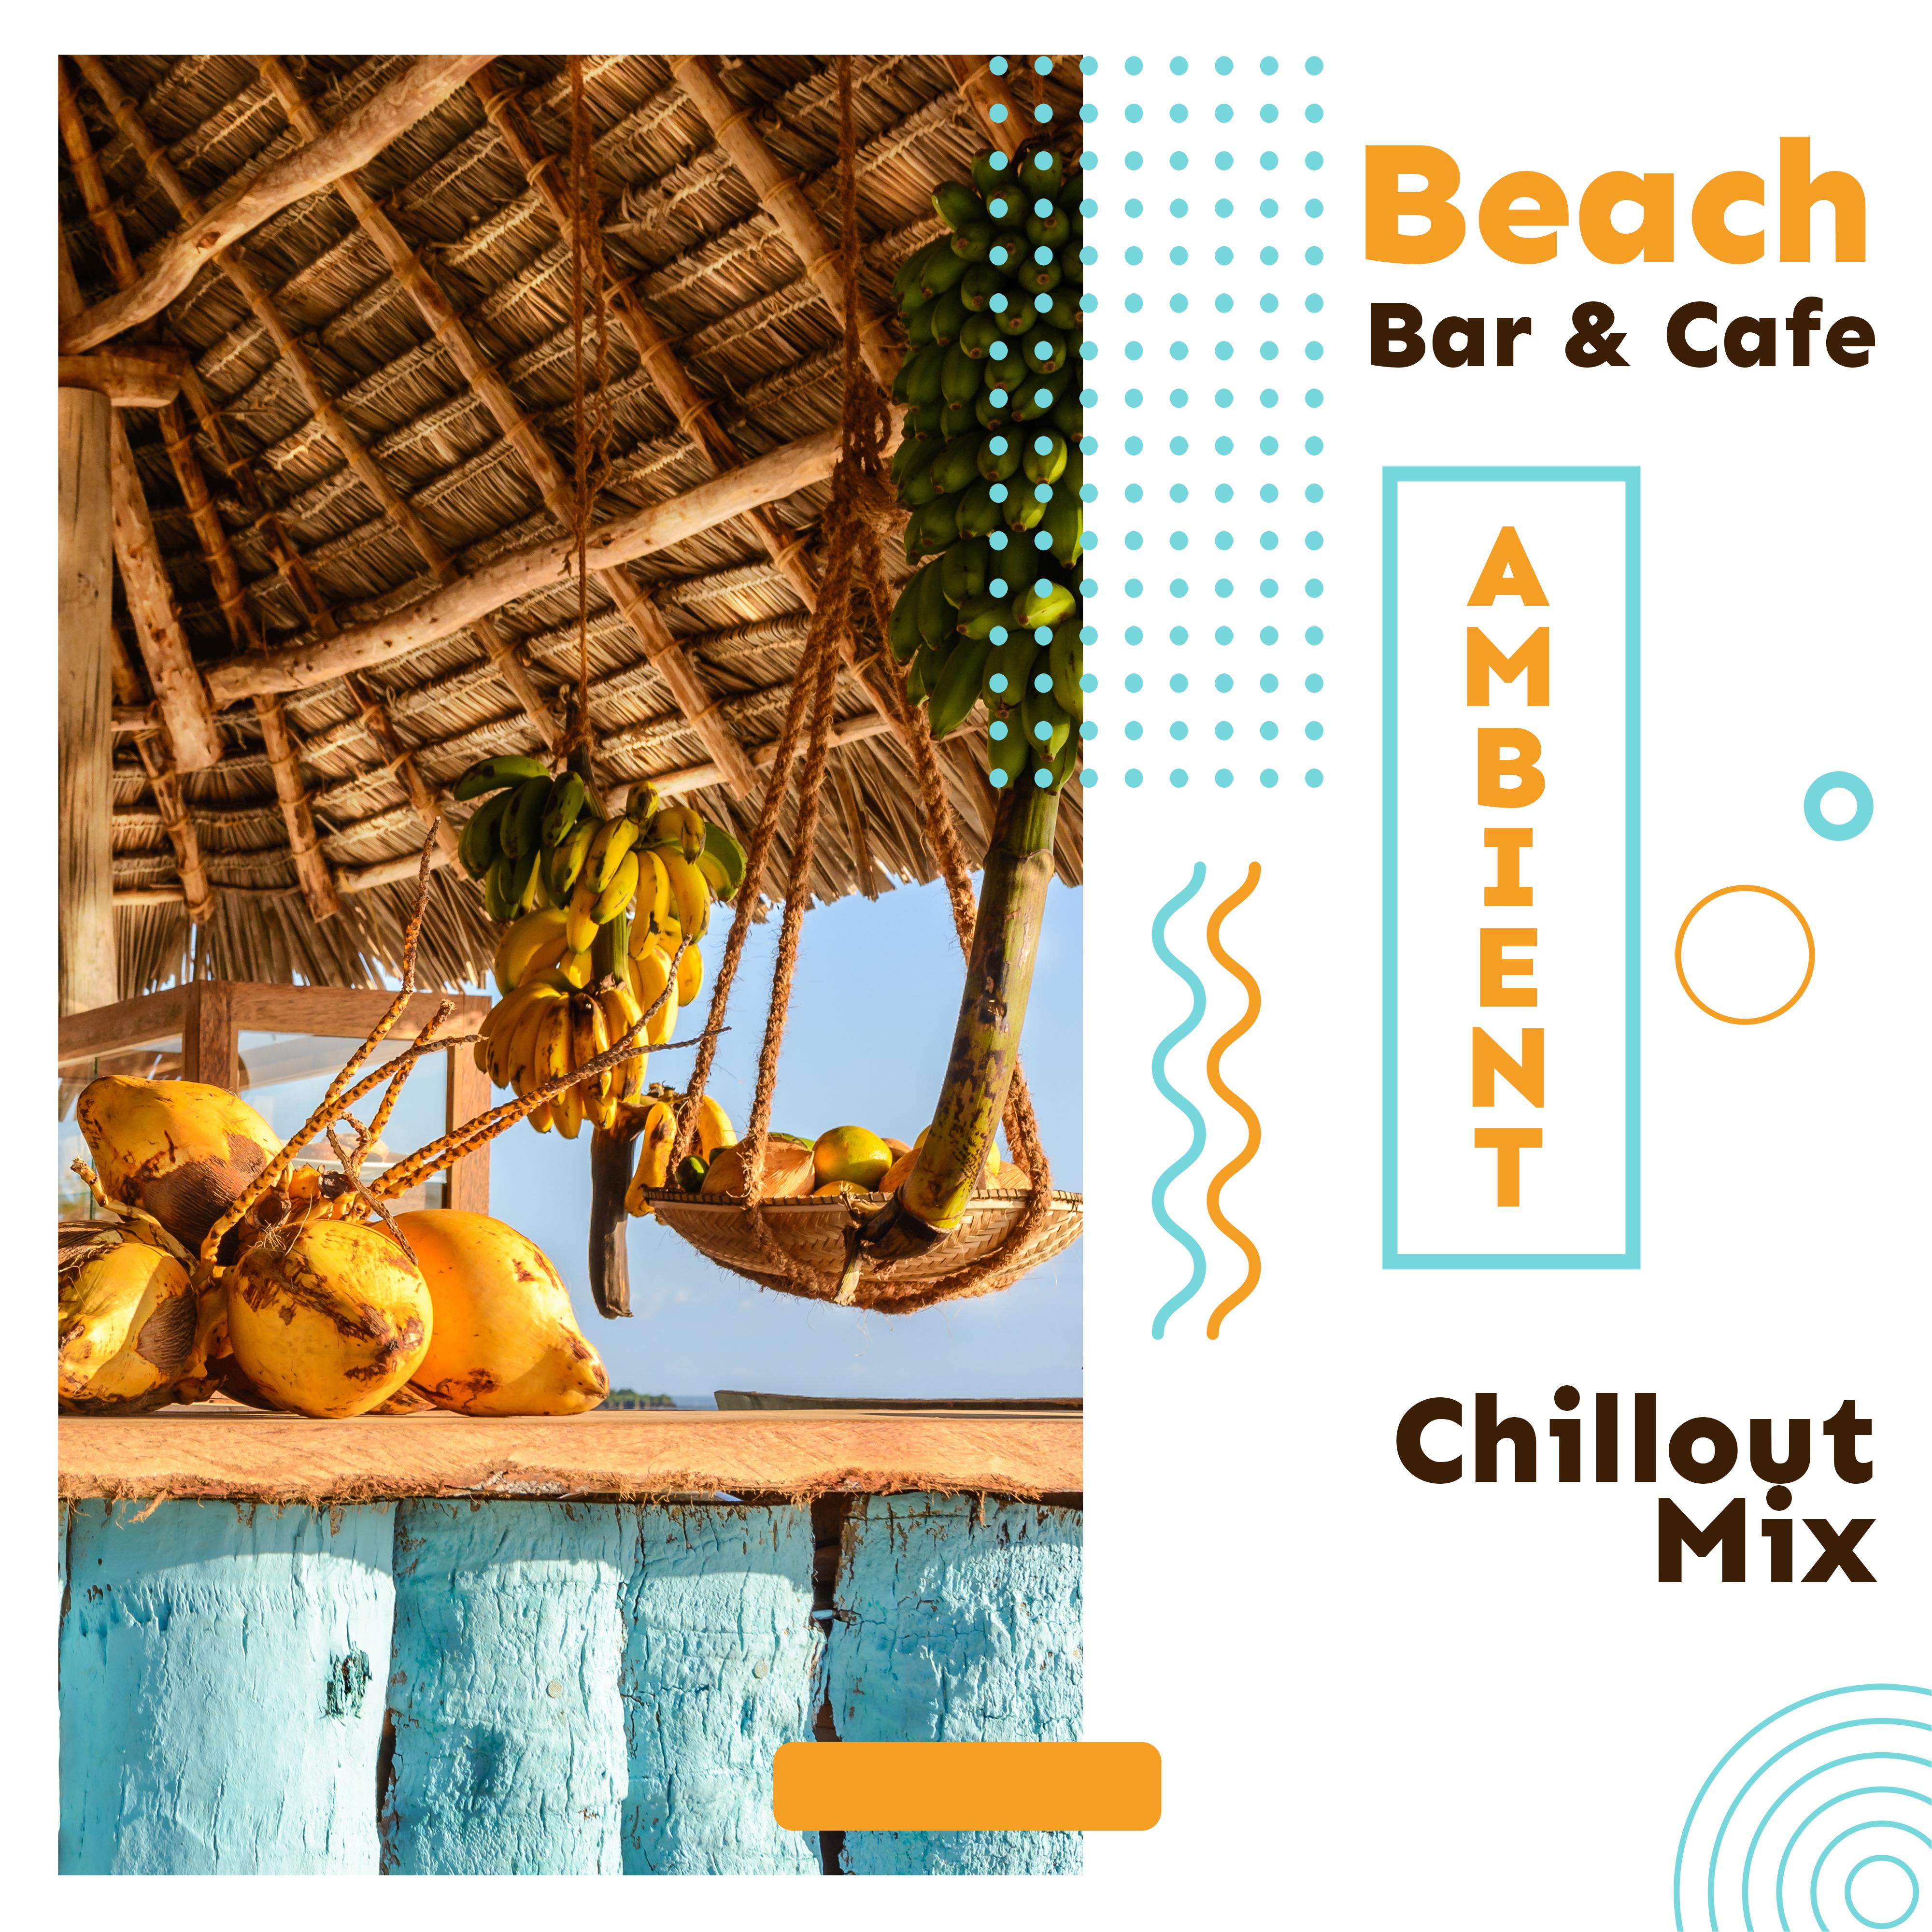 Beach Bar & Cafe Ambient Chillout Mix: Selection of Best Relaxing 2019 Chill Out Music, Most Beautiful Ambient Songs for Spending Time in the Beach Cafe or Bar with Love or Friends